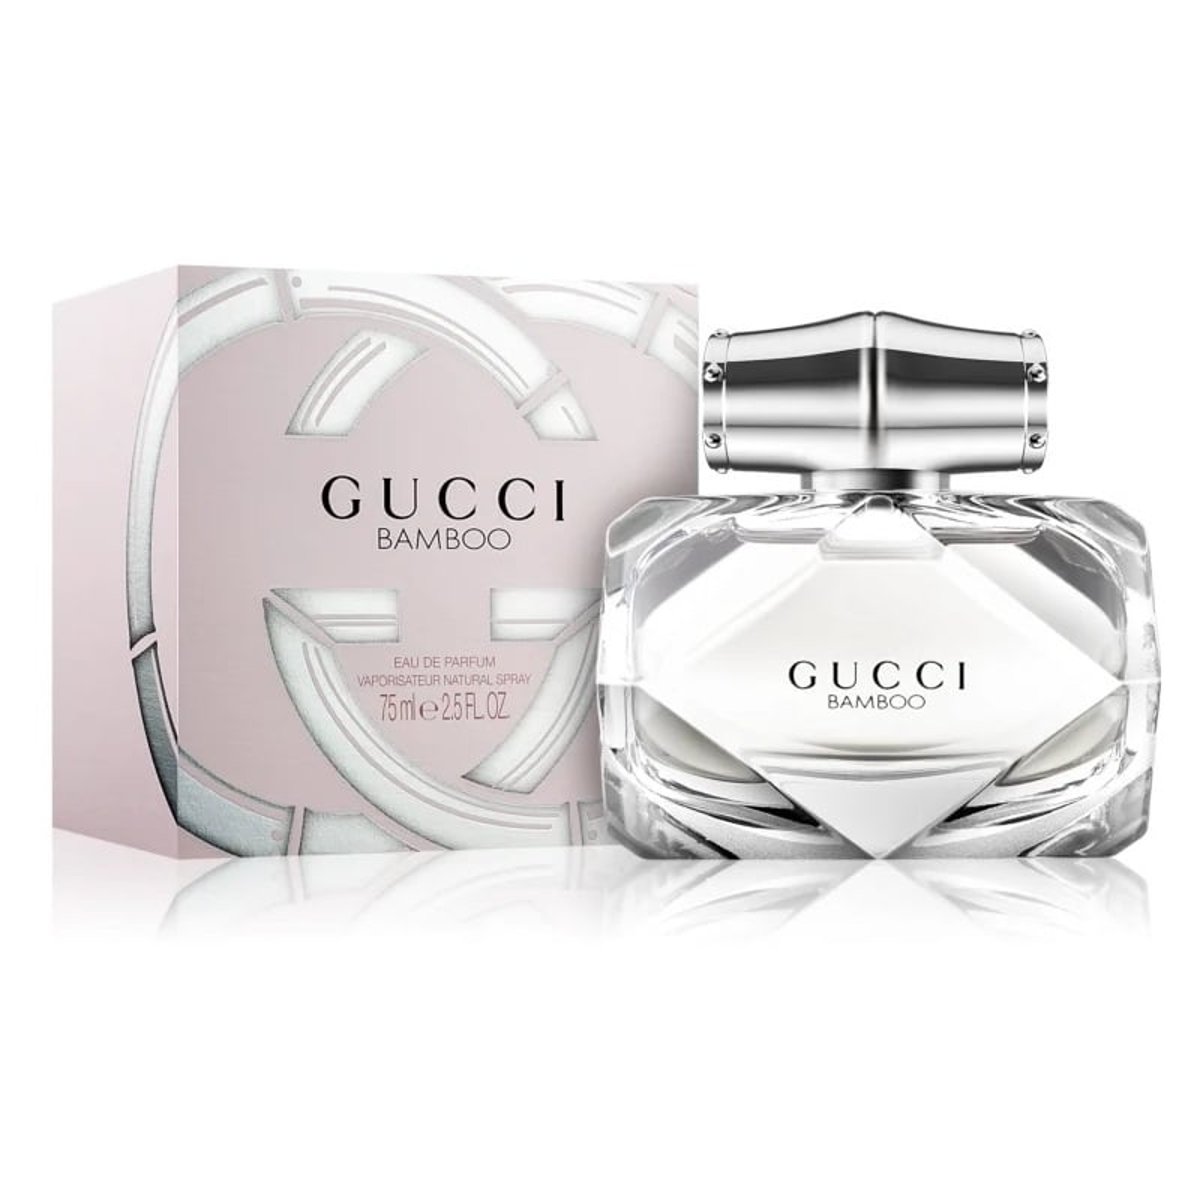 Usual Petulance Reactor Gucci Bamboo For Women 75ml Eau de Parfum price in Oman | Sale on Gucci  Bamboo For Women 75ml Eau de Parfum in Oman | Back to School offers on Gucci  Bamboo